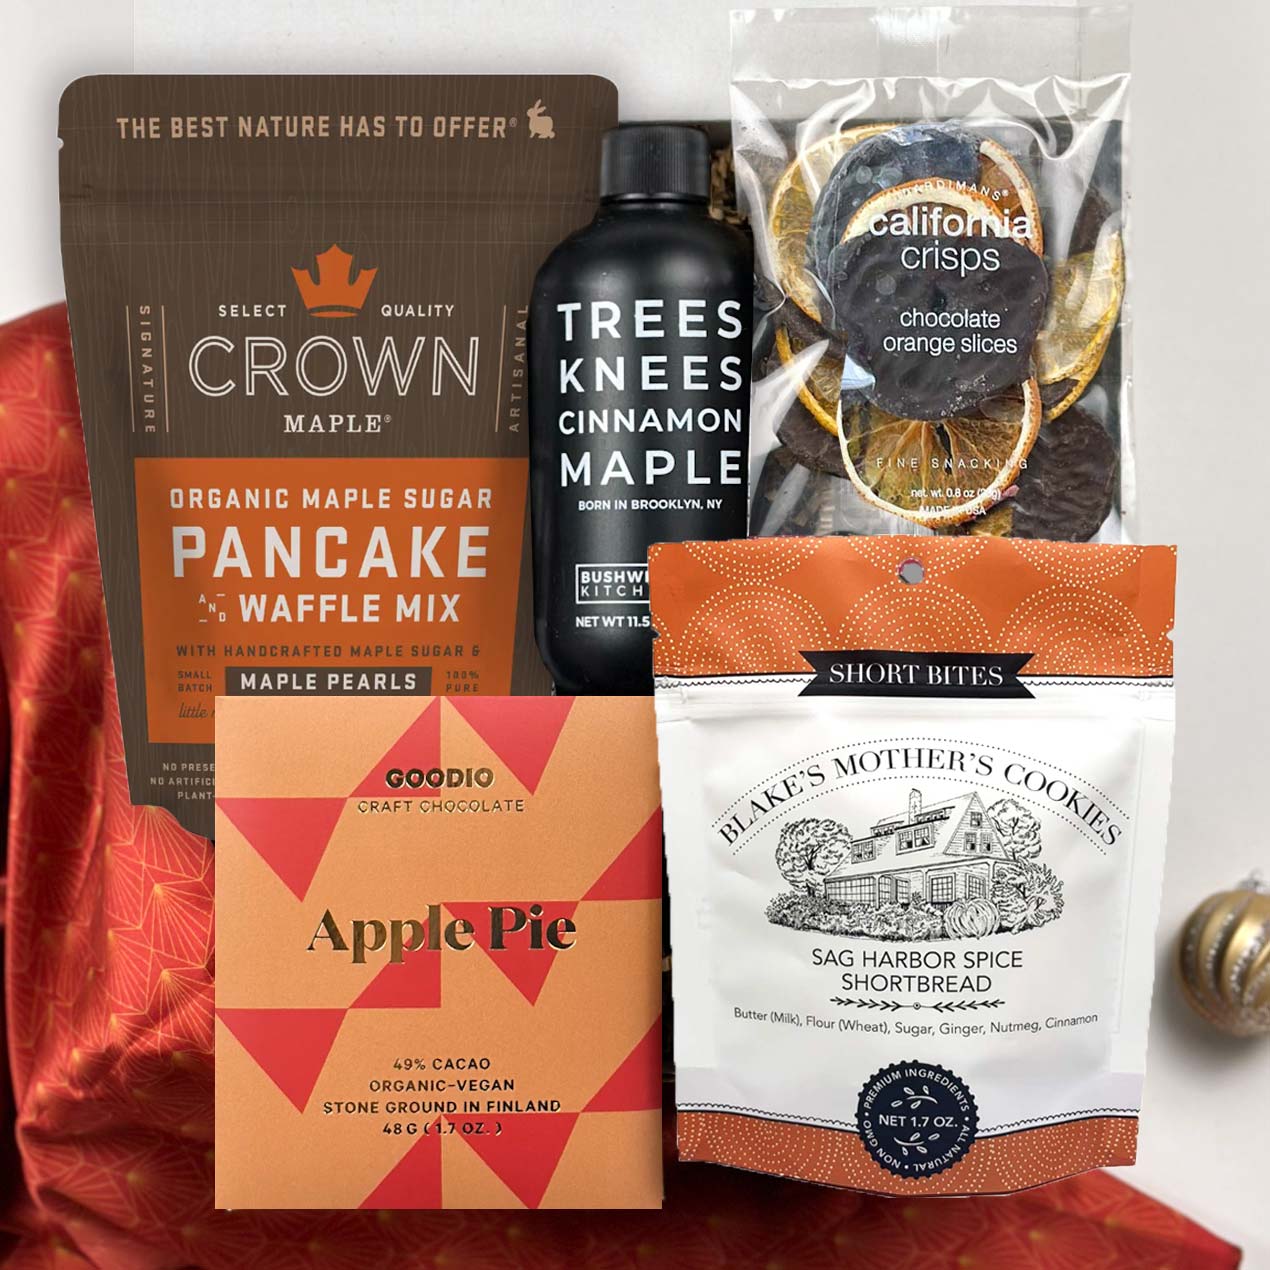 kadoo gourmet pancake holiday gift box with pancake &amp; waffle mix, cinnamon maple syrup, apple pie chocolate, cookie and more